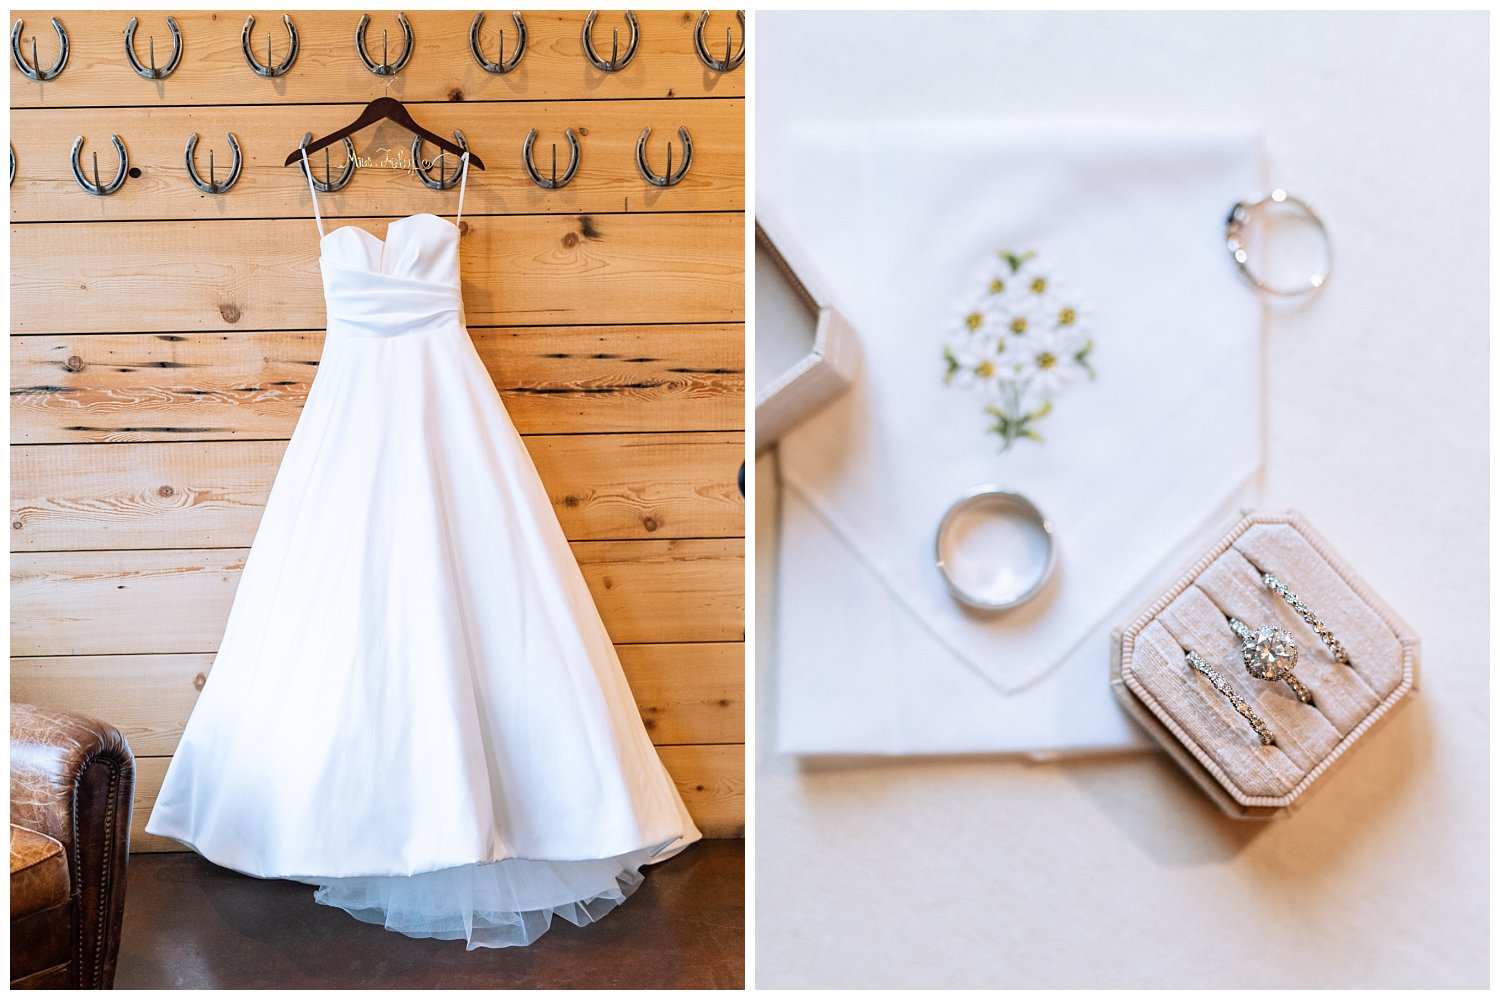 Classic wedding day dress and details